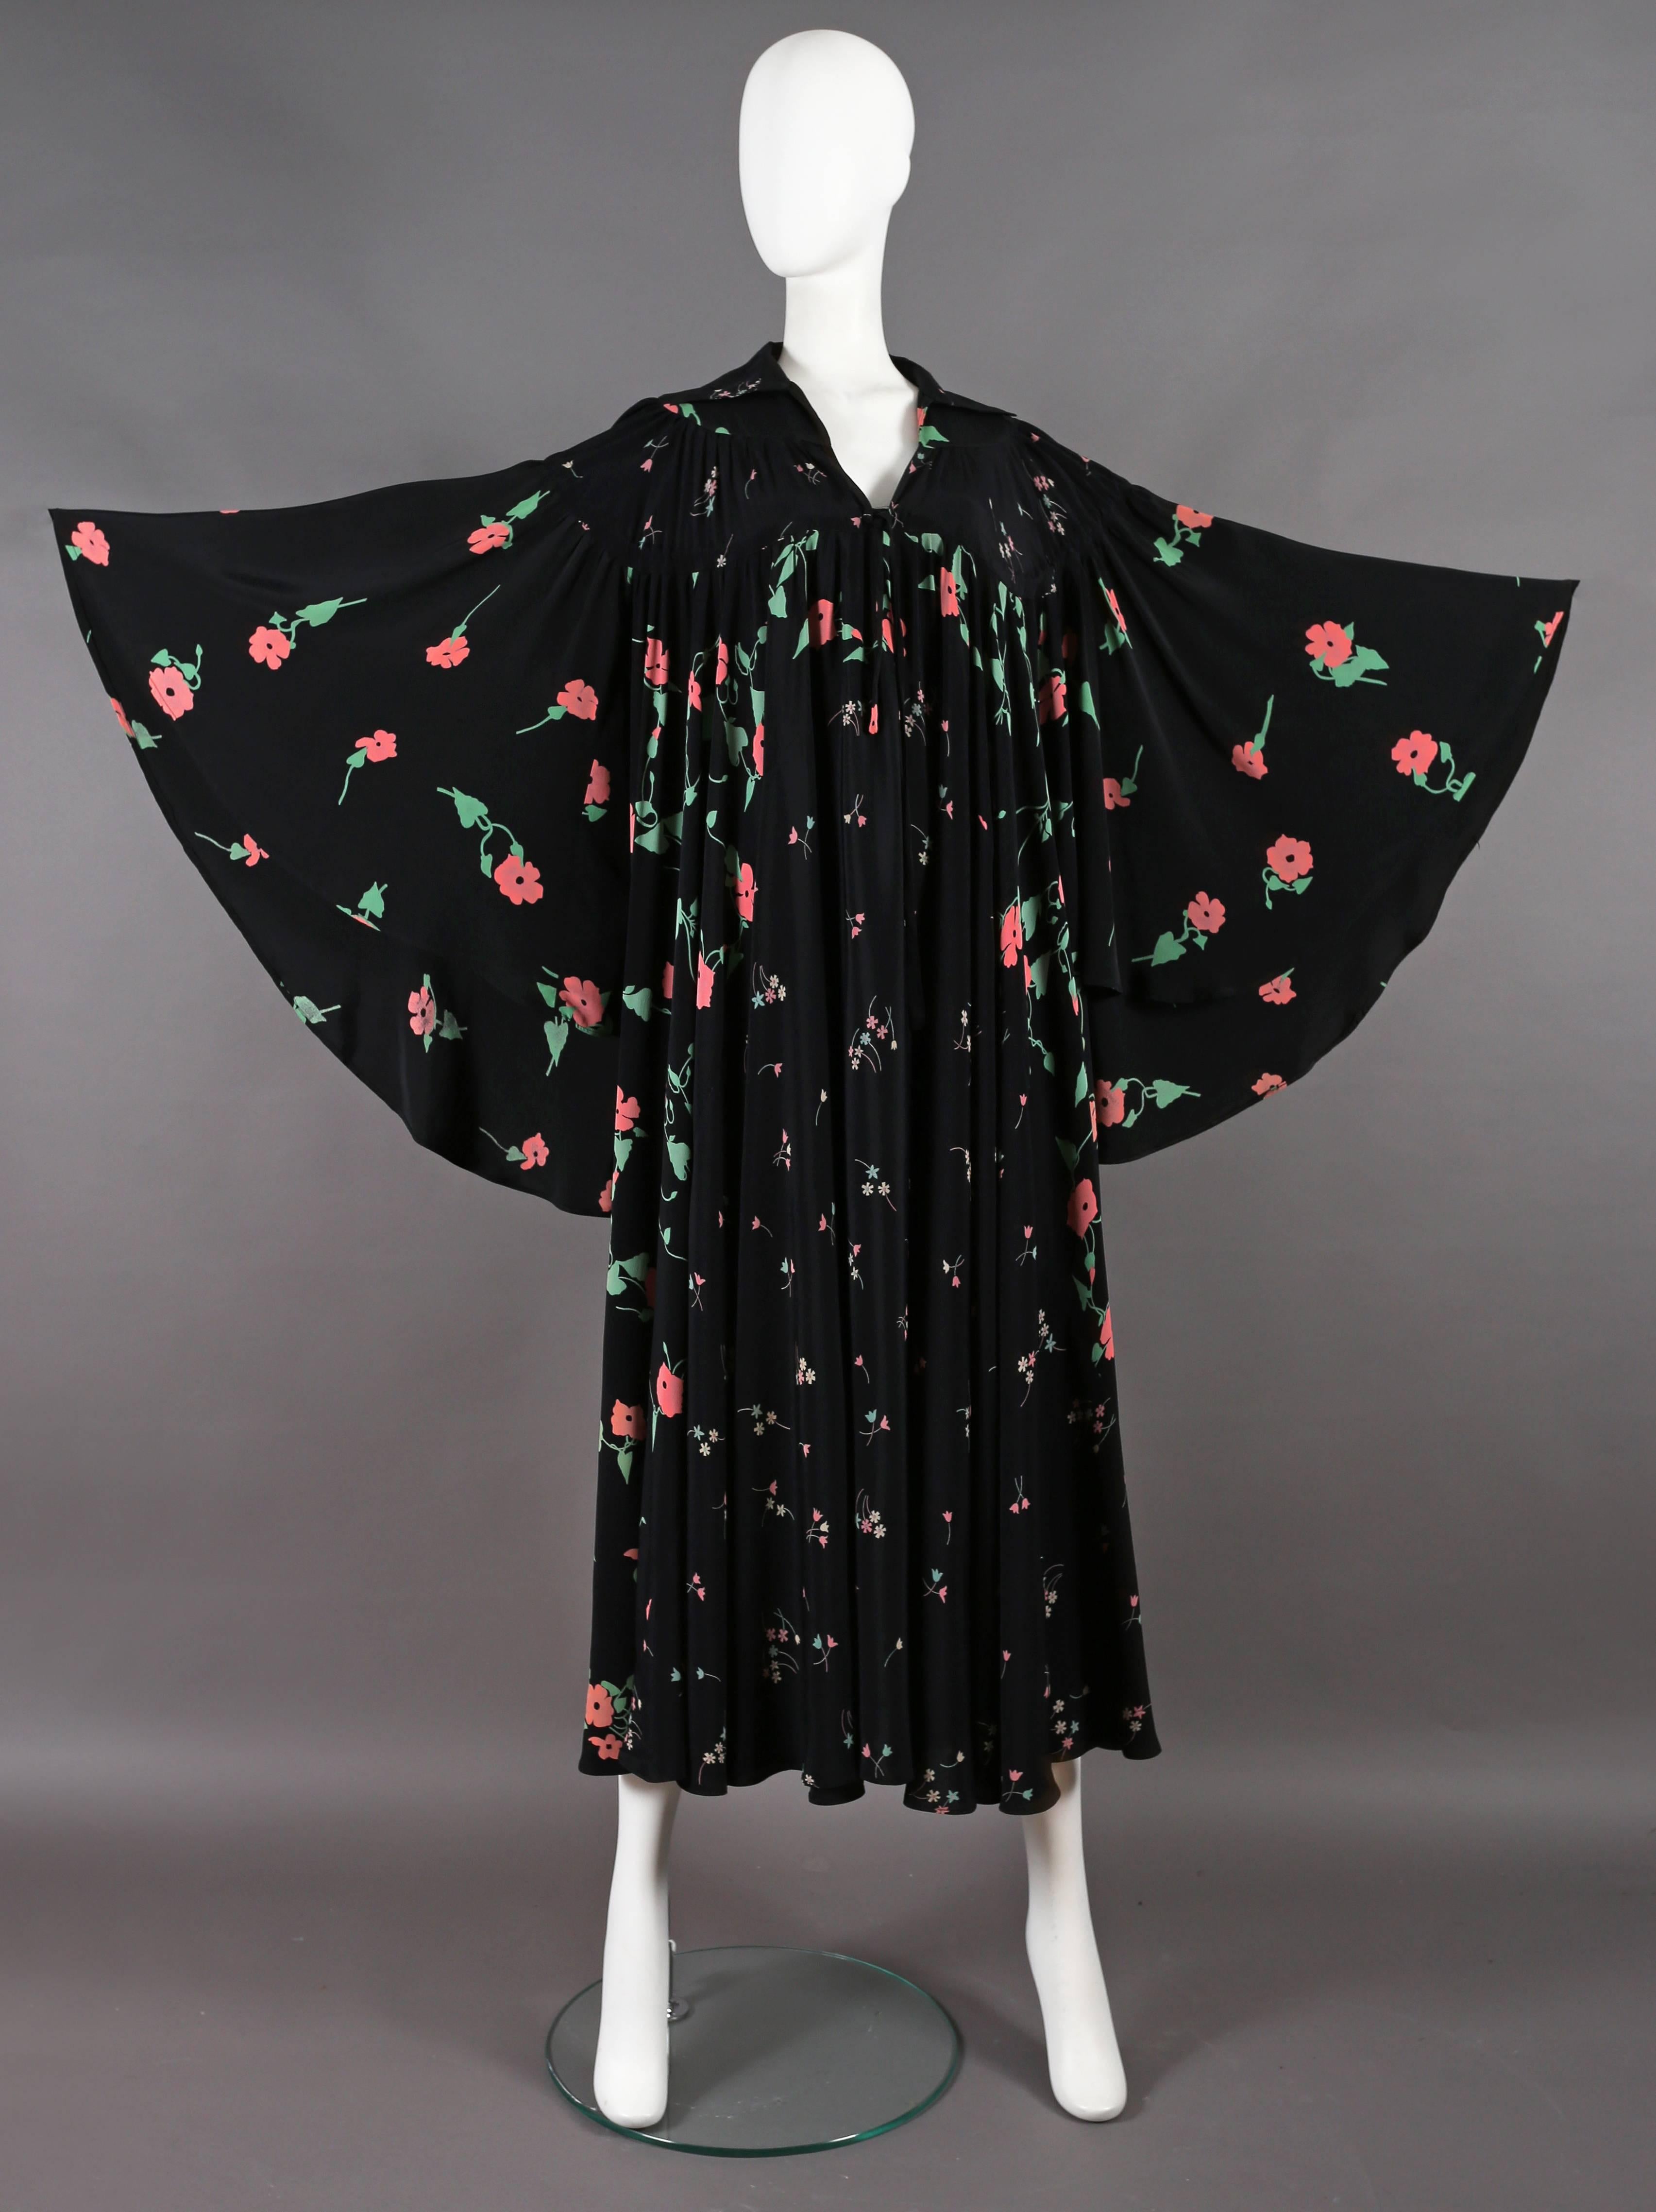 Exquisite and extremely rare Ossie Clark angel dress from his couture line with the 'Busy Lizzie' print by Celia Birtwell, circa 1972. 

The dress features a drawstring fastening on the yoke, pointed open collar, enormous angel sleeves and pleated